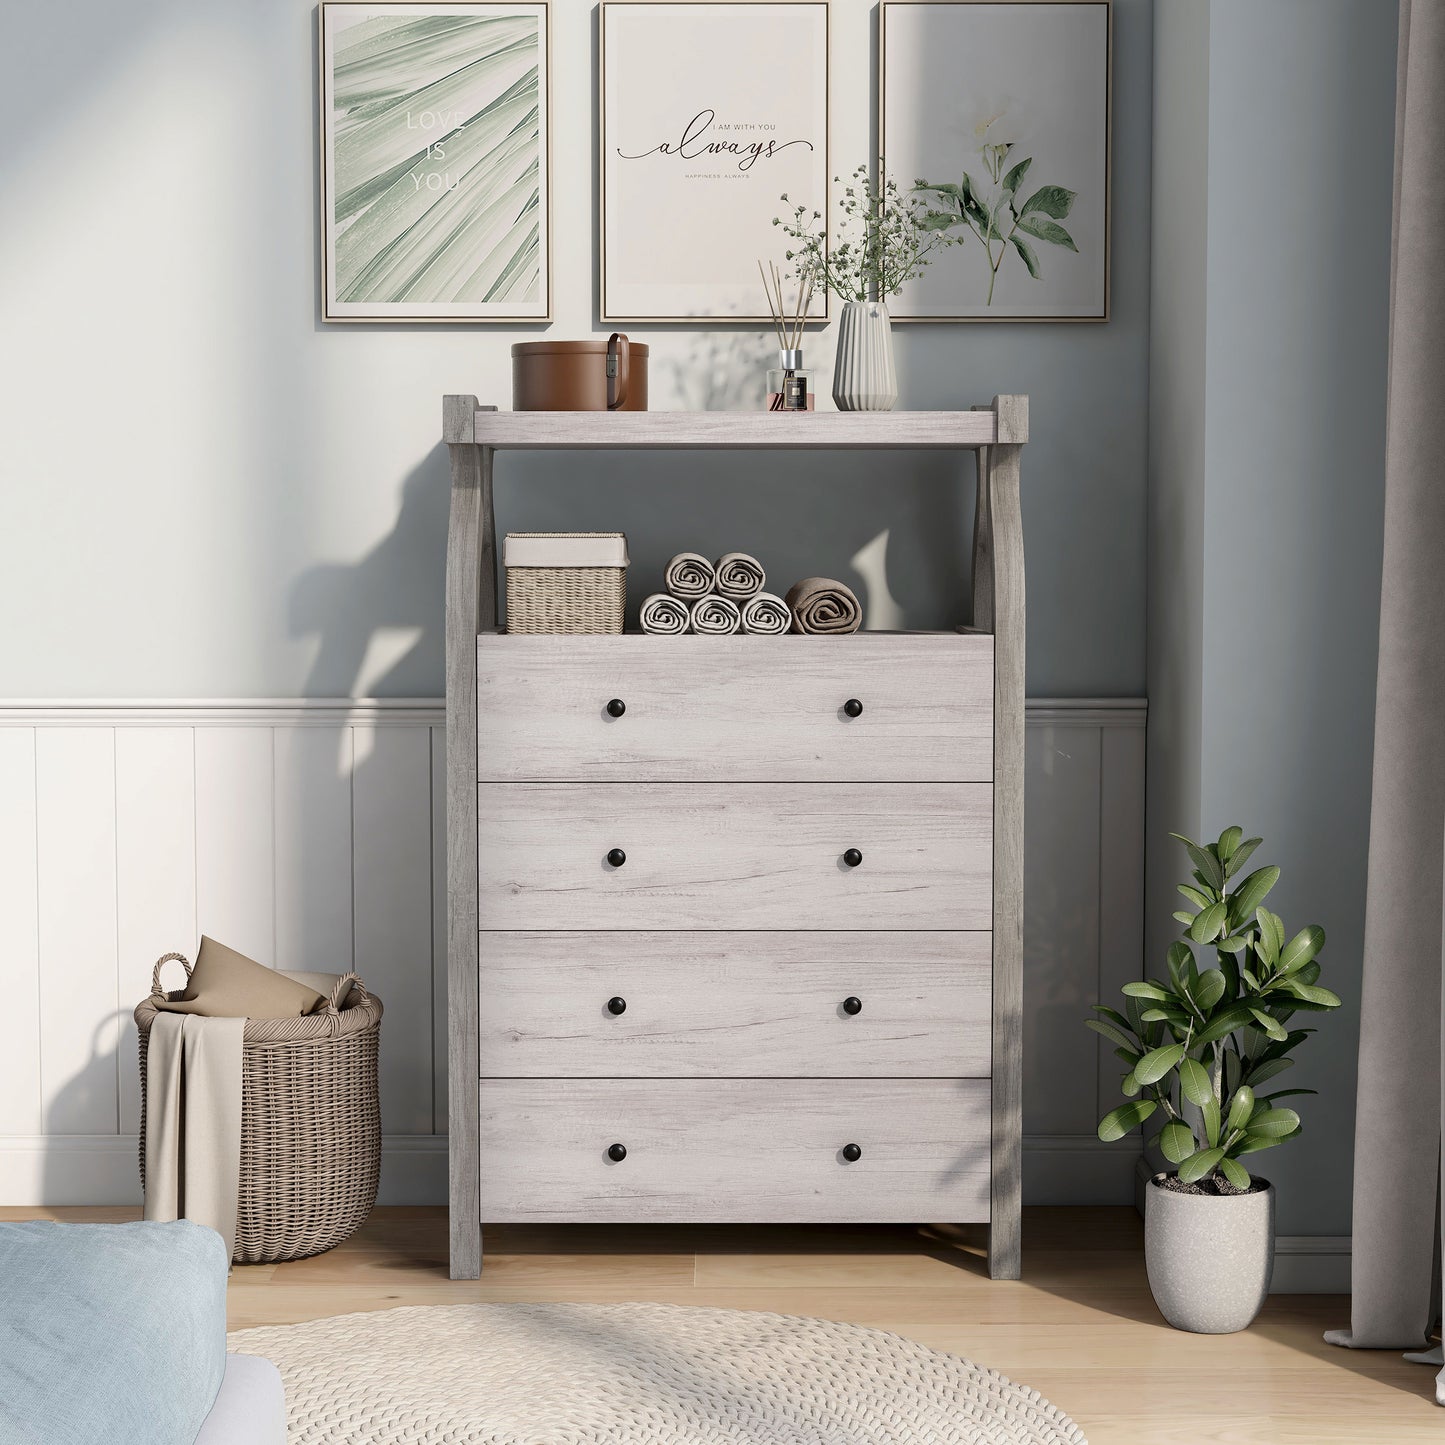 Front-facing transitional coastal white four-drawer tall dresser with a shelf in a bedroom with accessories